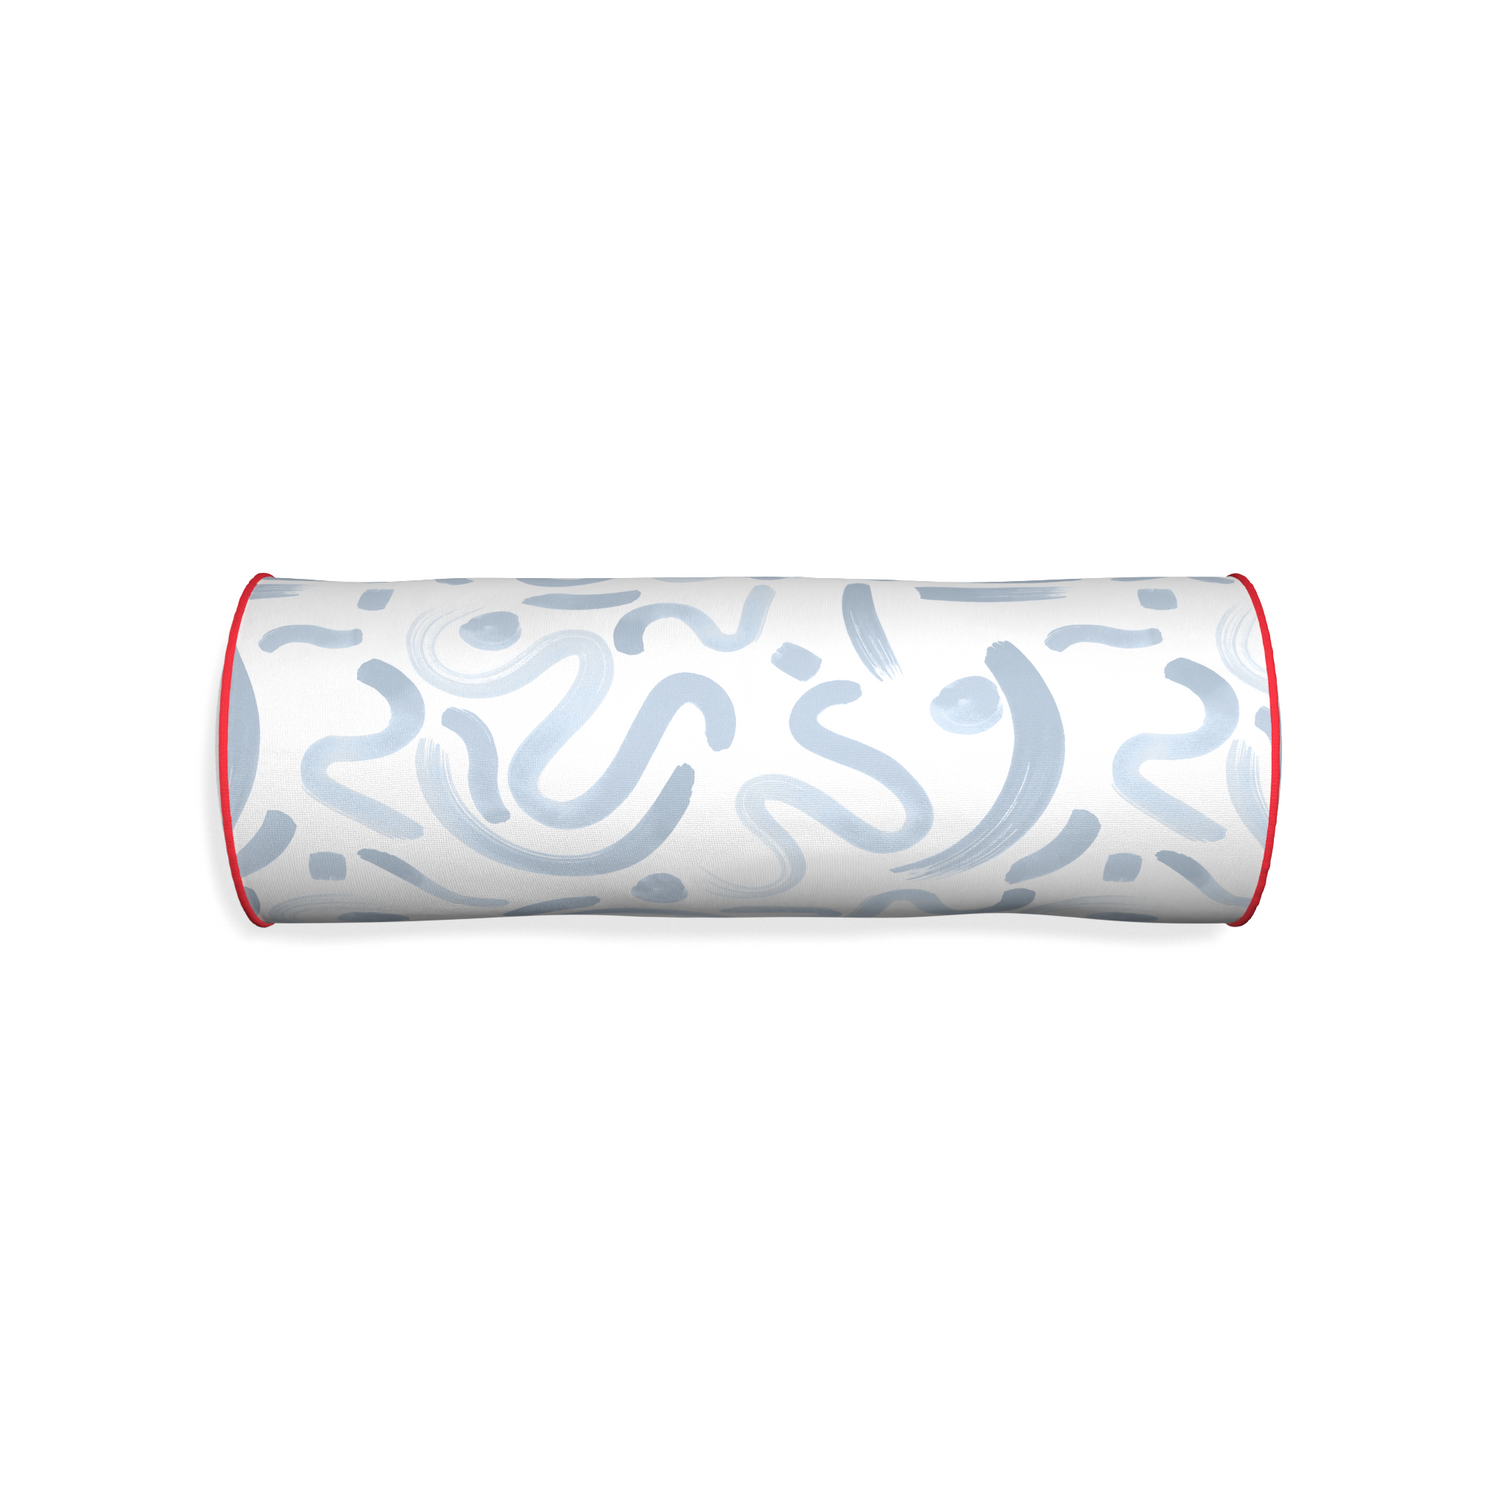 Bolster hockney sky custom abstract sky bluepillow with cherry piping on white background